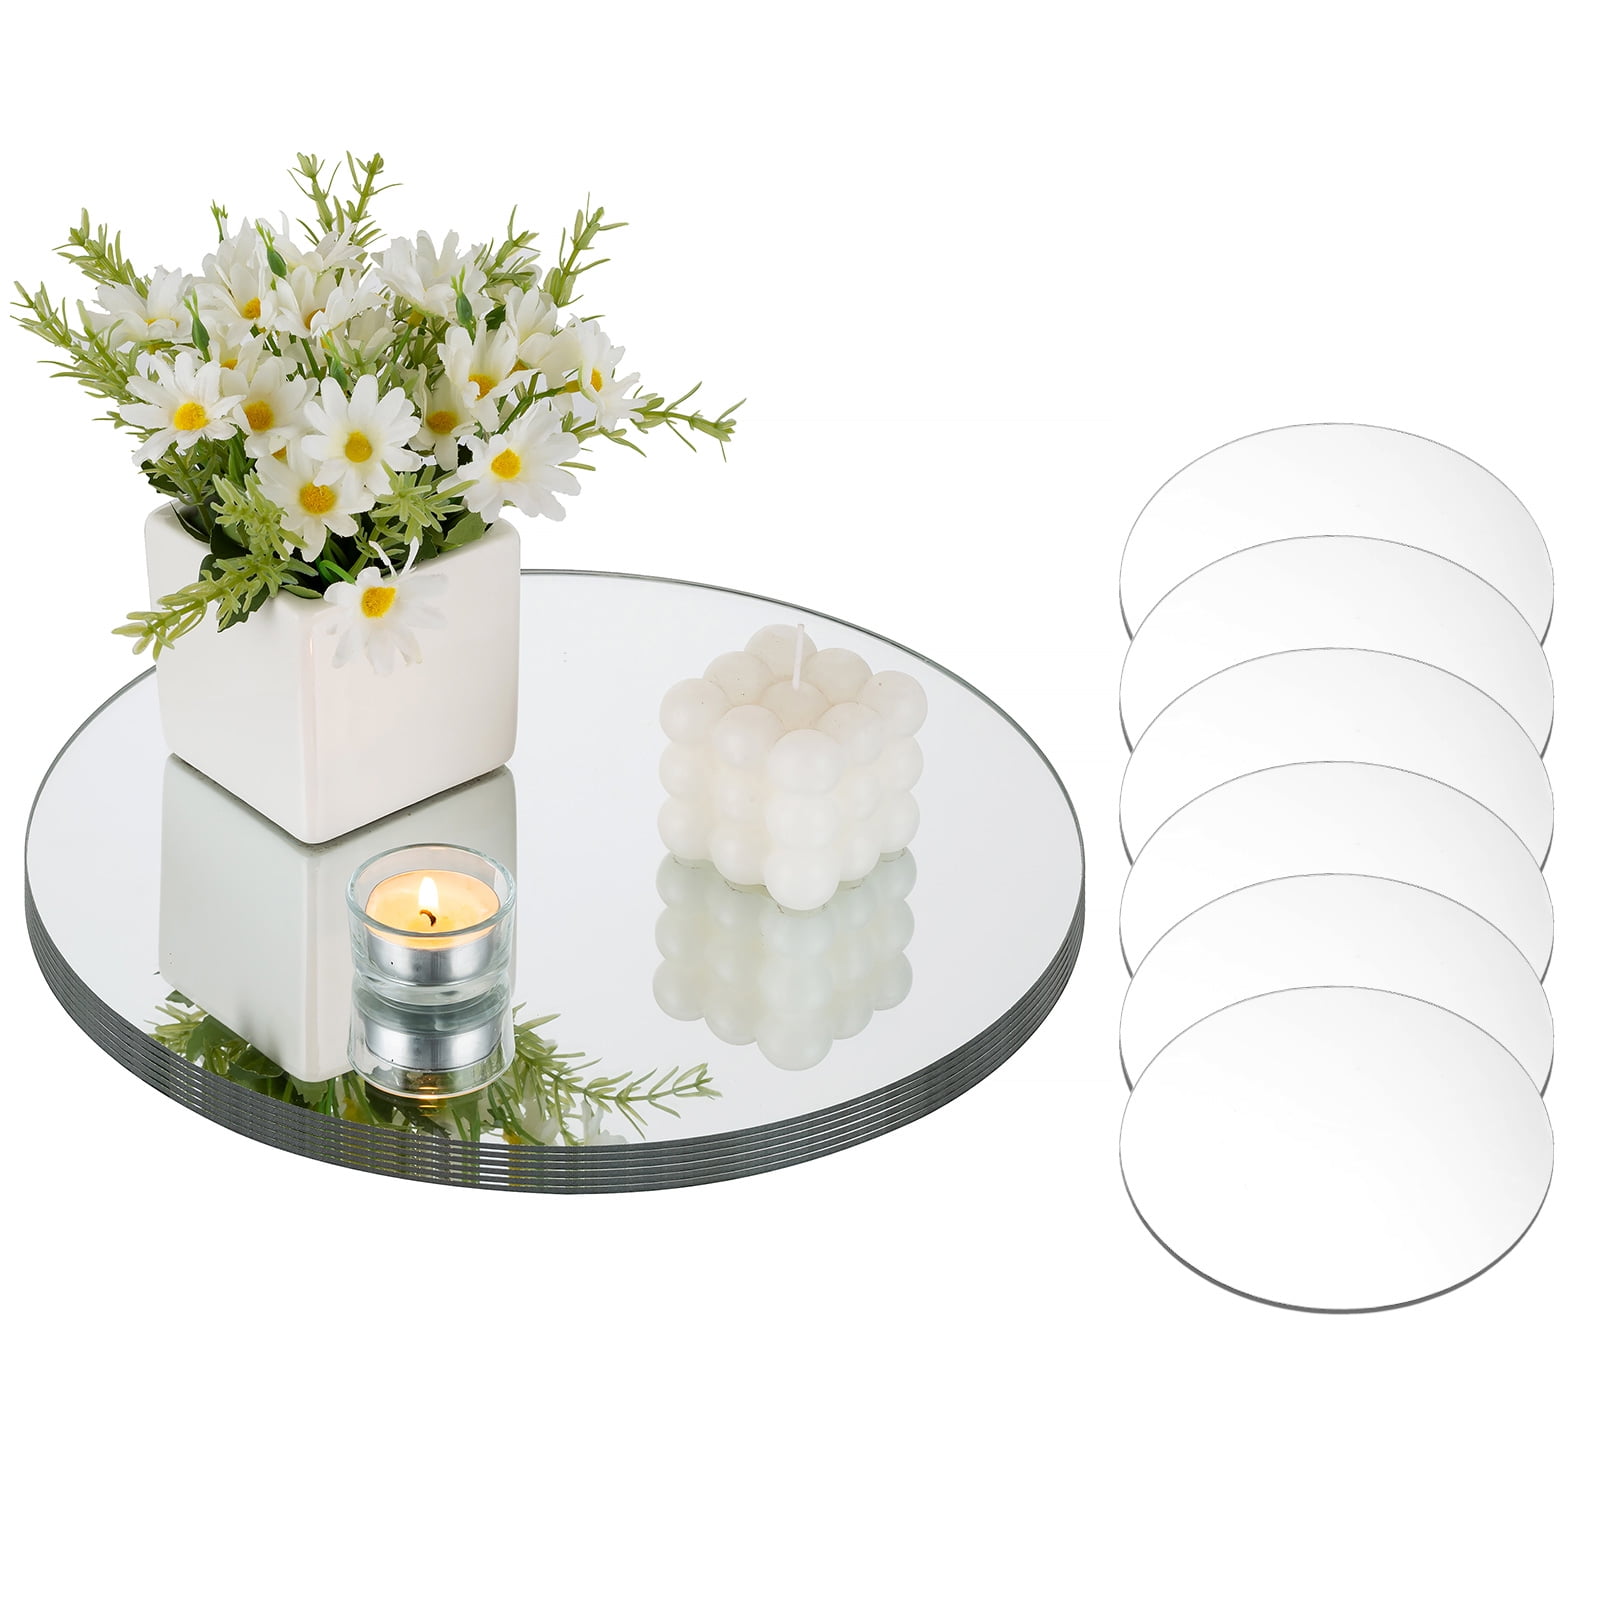 Bulk 12 pieces Round or Square Centerpiece Mirrors for Wedding